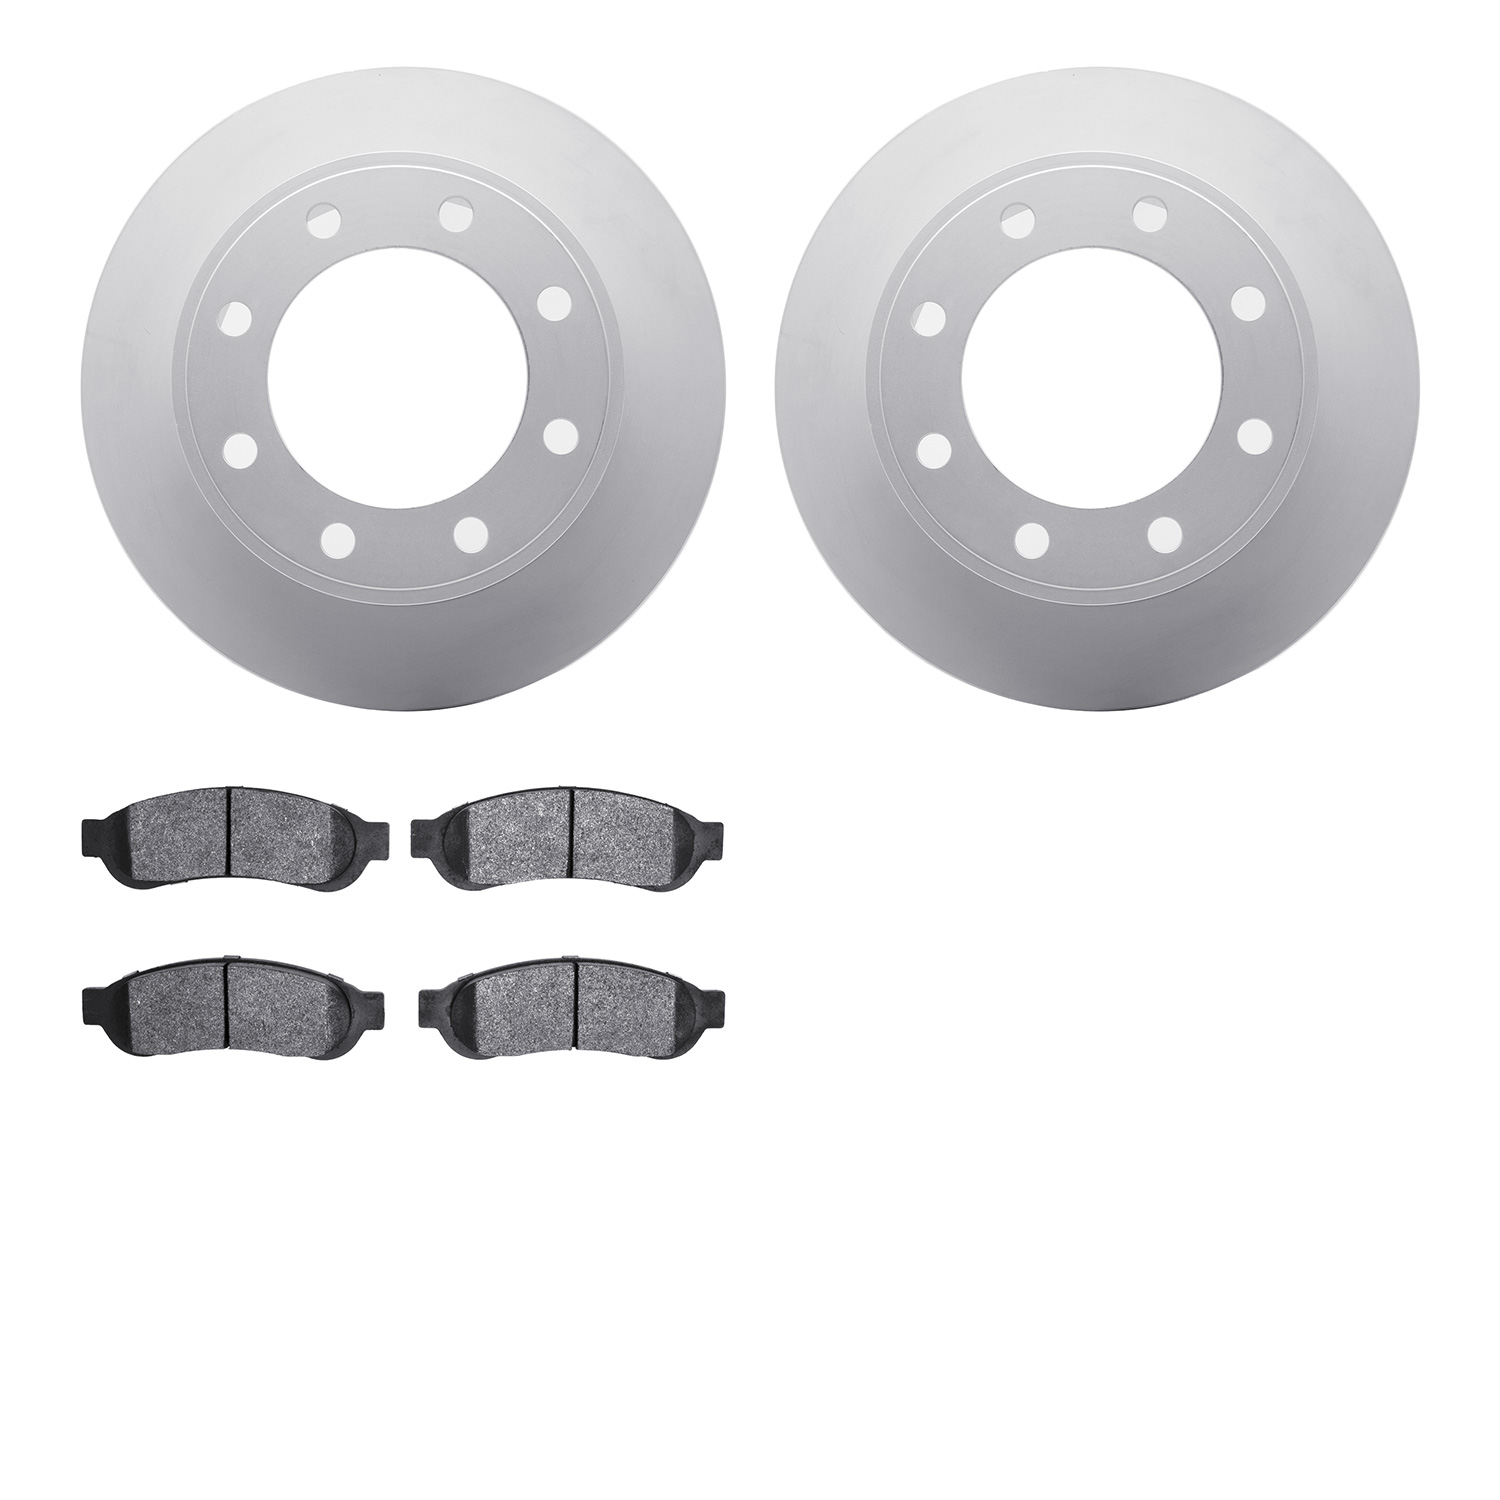 4402-54055 Geospec Brake Rotors with Ultimate-Duty Brake Pads Kit, 2006-2010 Ford/Lincoln/Mercury/Mazda, Position: Rear